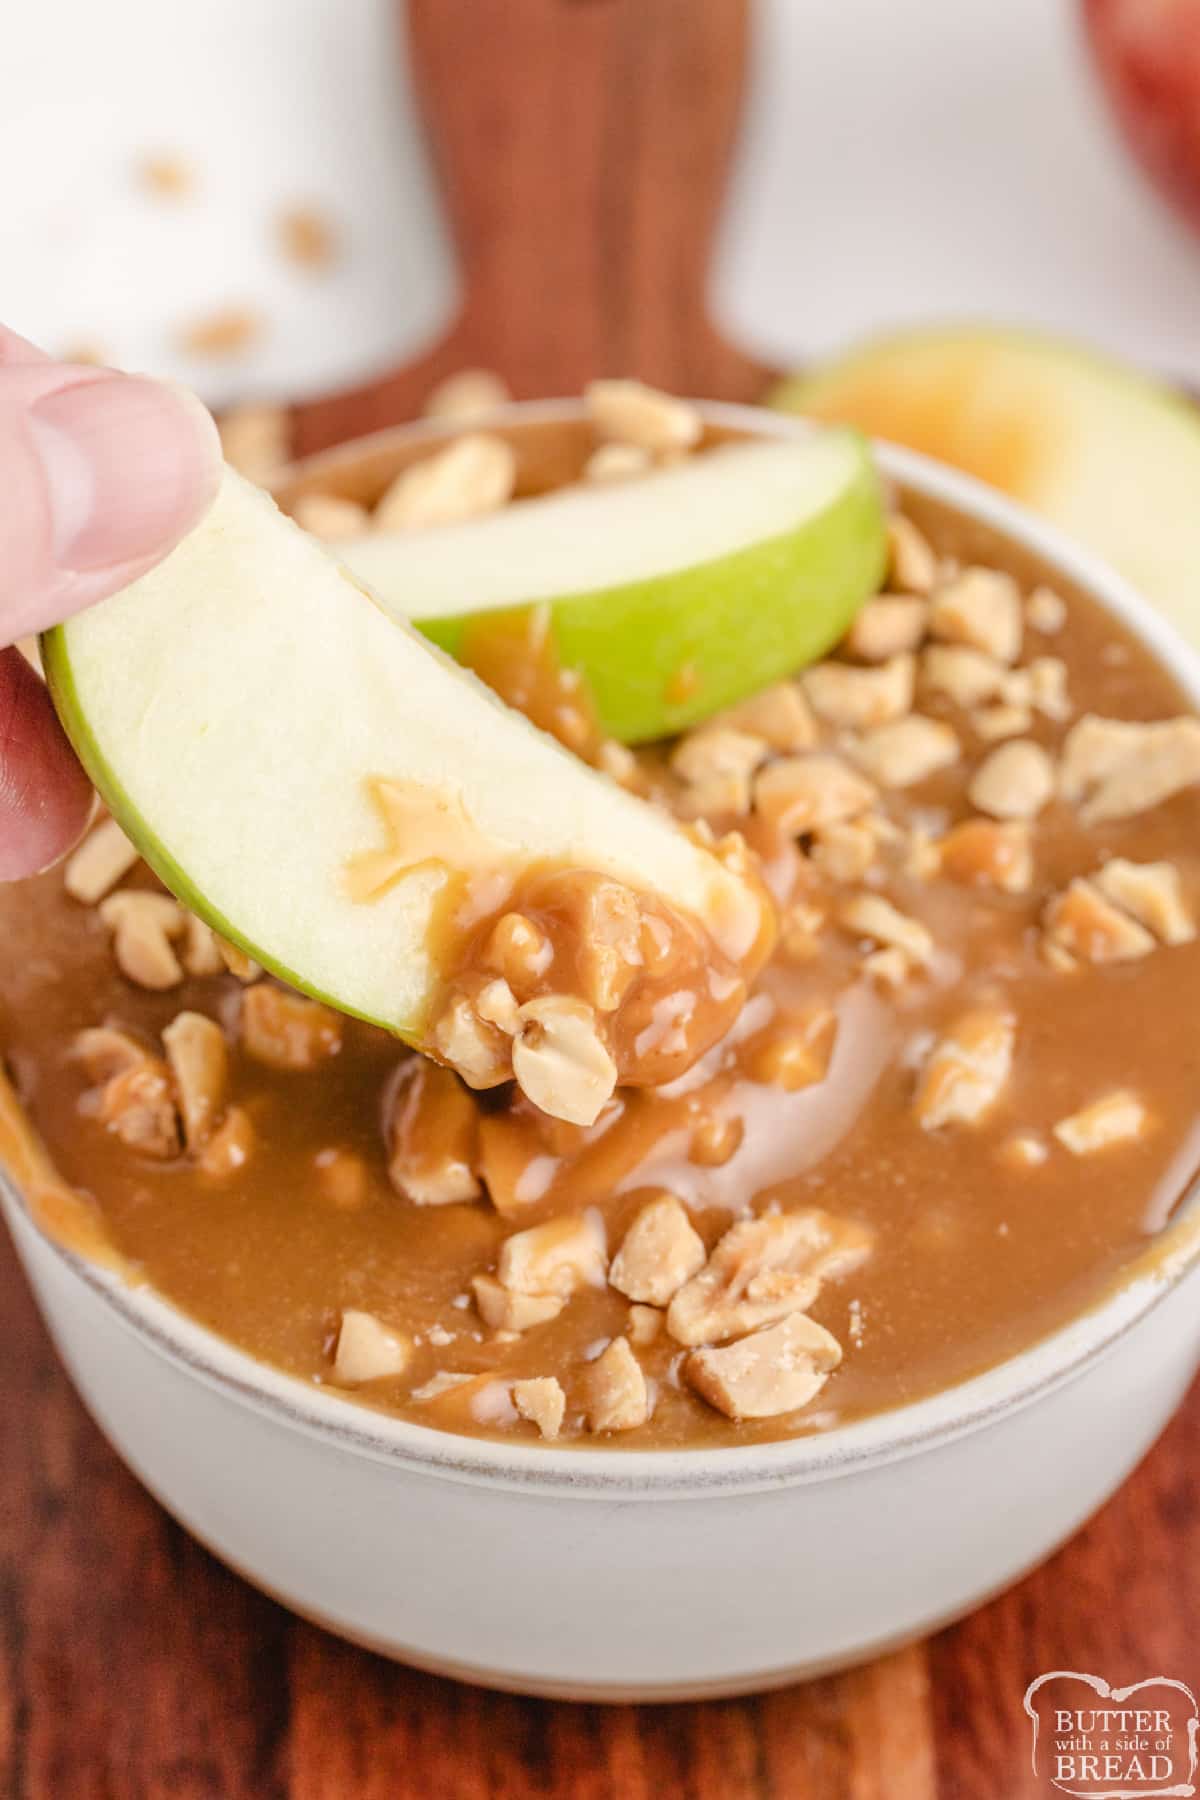 Creamy Caramel Peanut Butter Dip is made with 4 simple ingredients and is perfect for dipping apples. Made with melted caramels, milk, peanut butter, and chopped peanuts in less than 5 minutes!